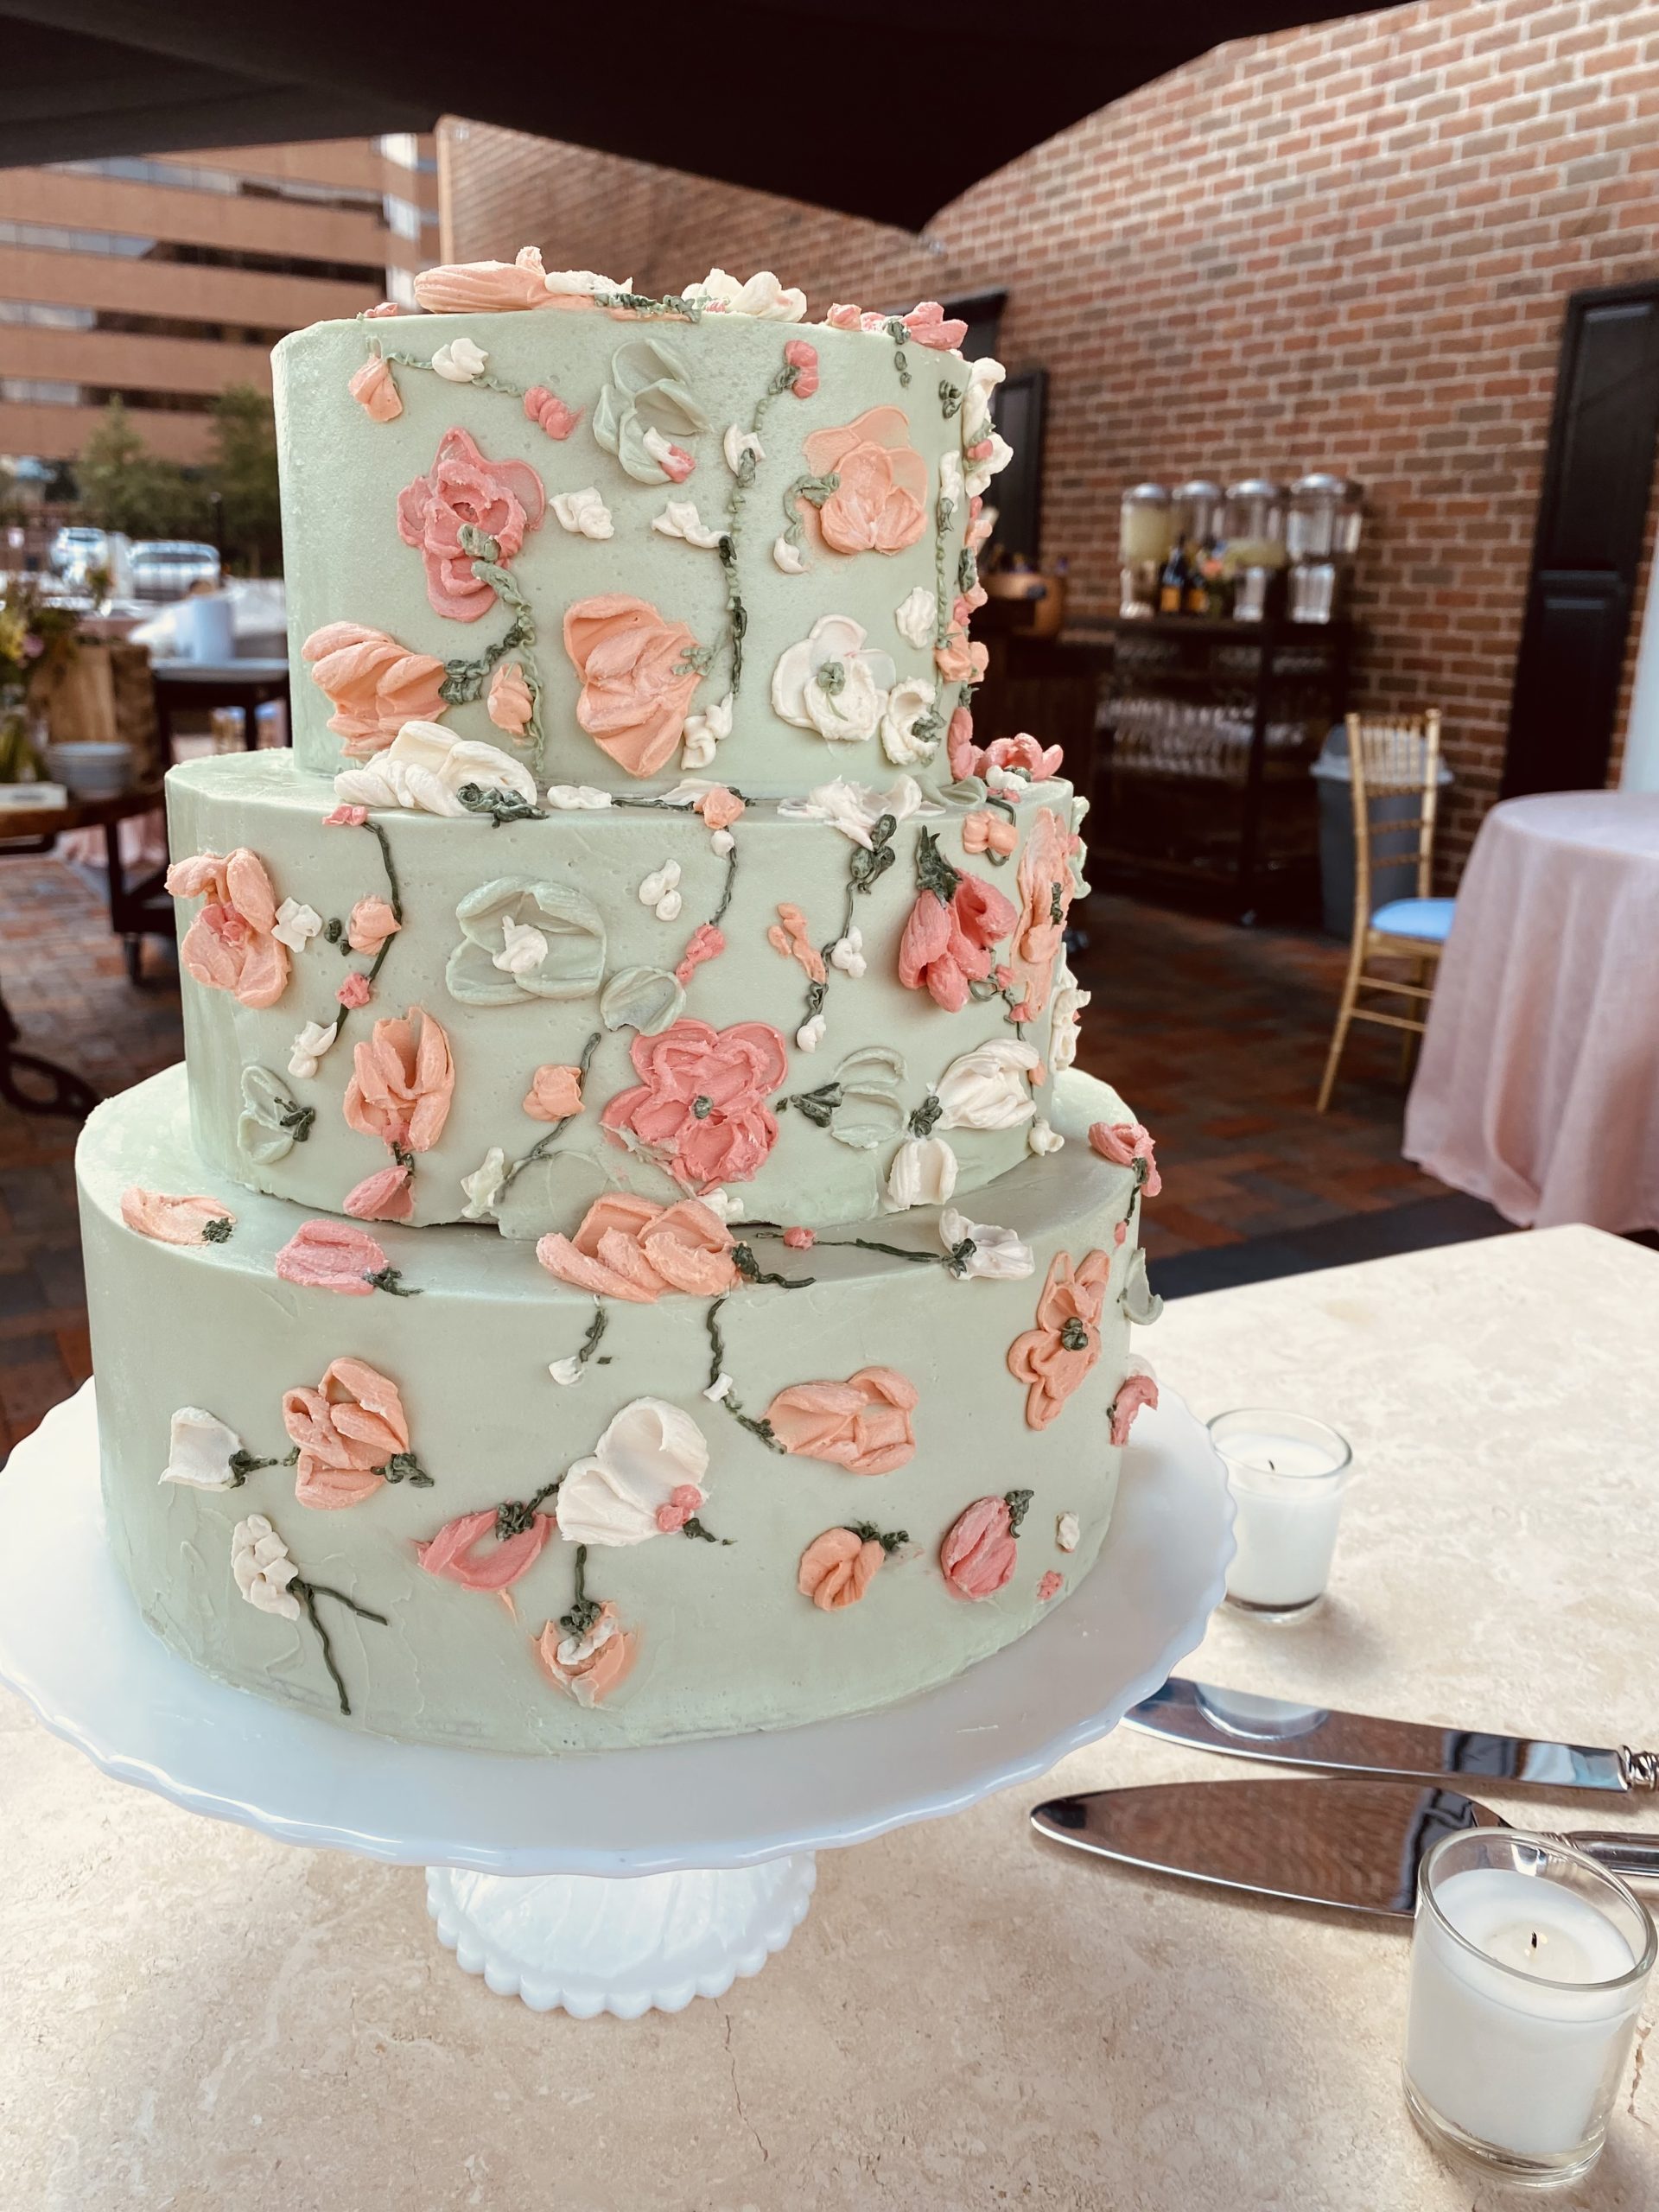 A beautiful 3-tier custom wedding cake with palette knife flowers from Village Patisserie in Toledo, Ohio